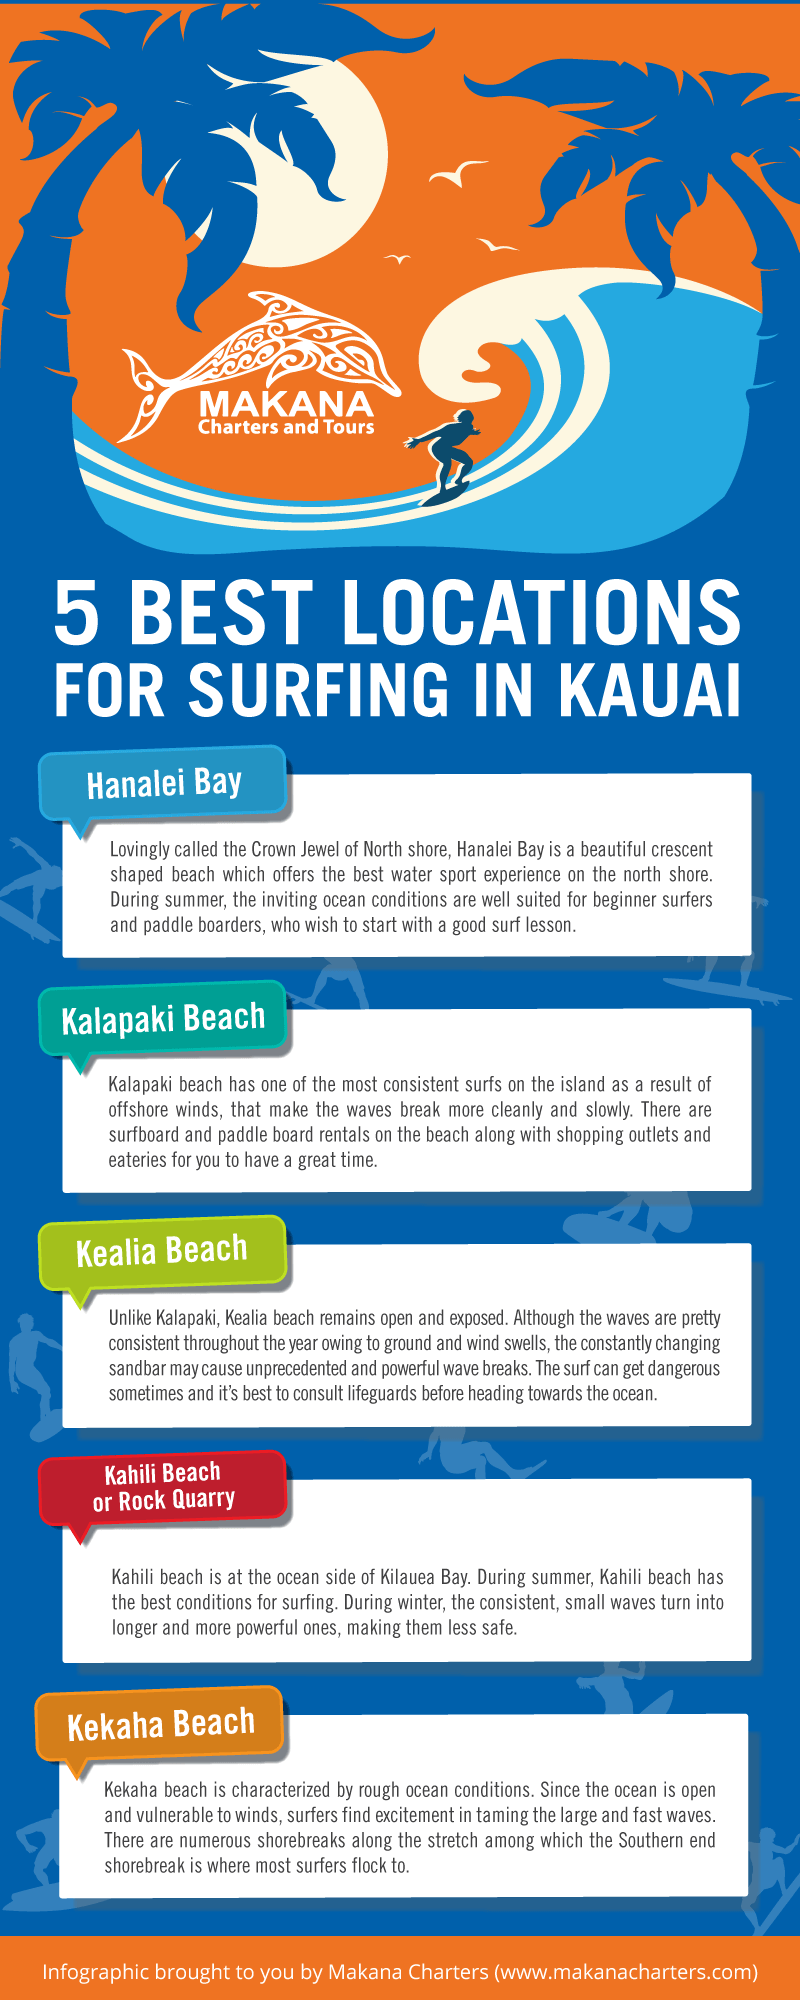 5 Best Locations for Surfing in Kauai - Infographic